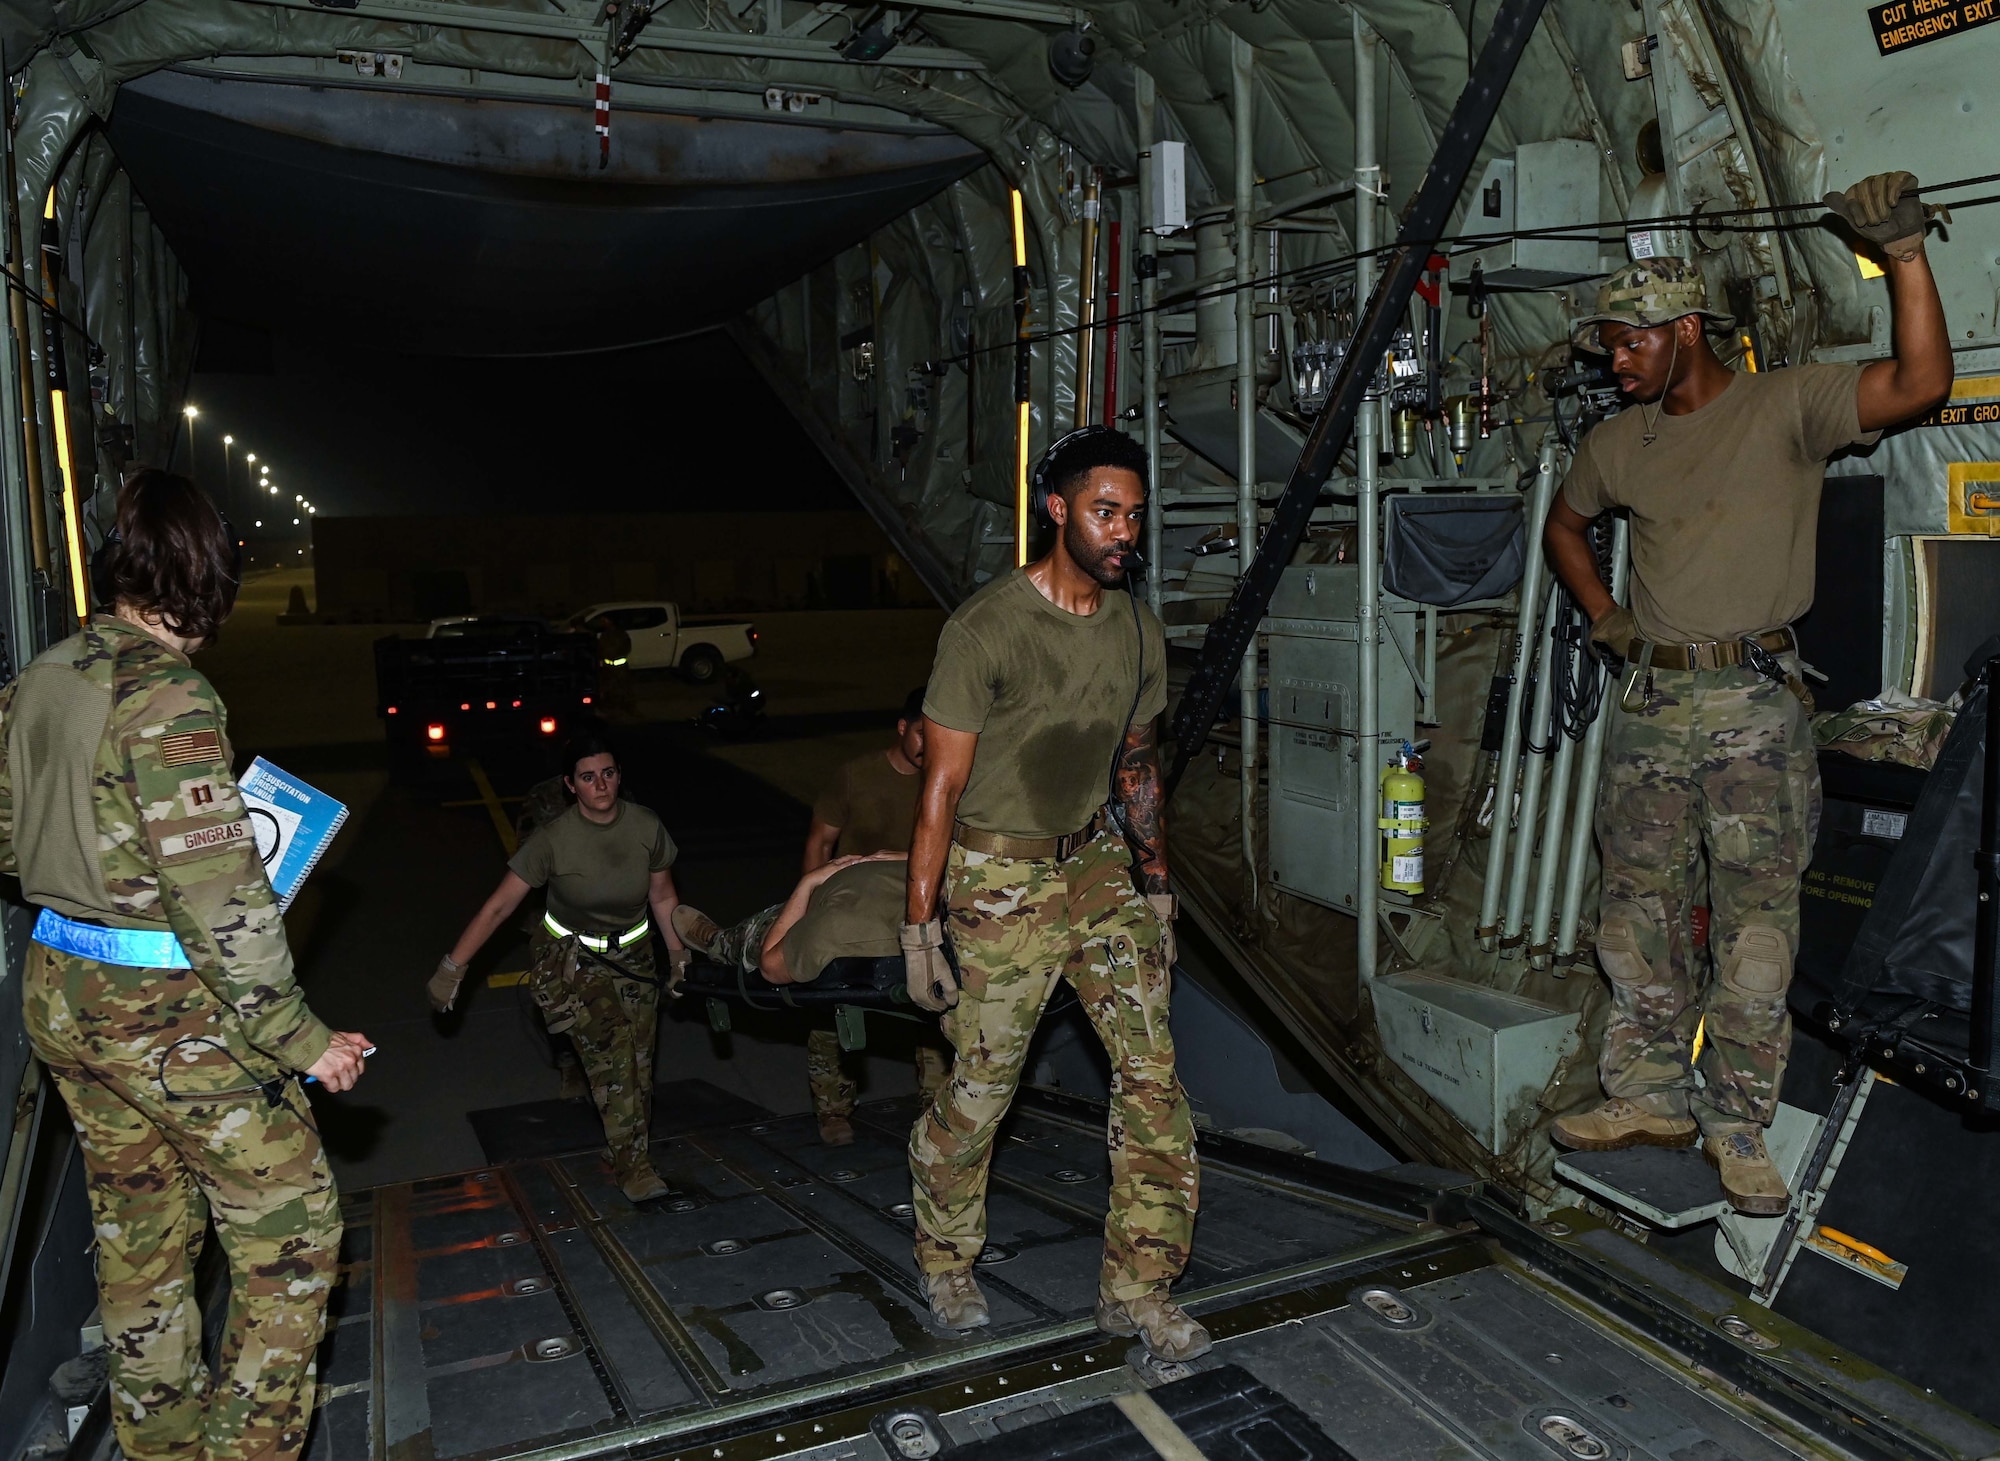 Airmen from the 379th Expeditionary Air Evacuation Squadron transport patients on board an MC-130J Commando II during an exercise Aug 4, 2022 at Al Udeid Airbase, Qatar. Casualties stowed away receive swift medical attention from flight nurses. (U.S. Air National Guard photo by Master Sgt. Michael J. Kelly)